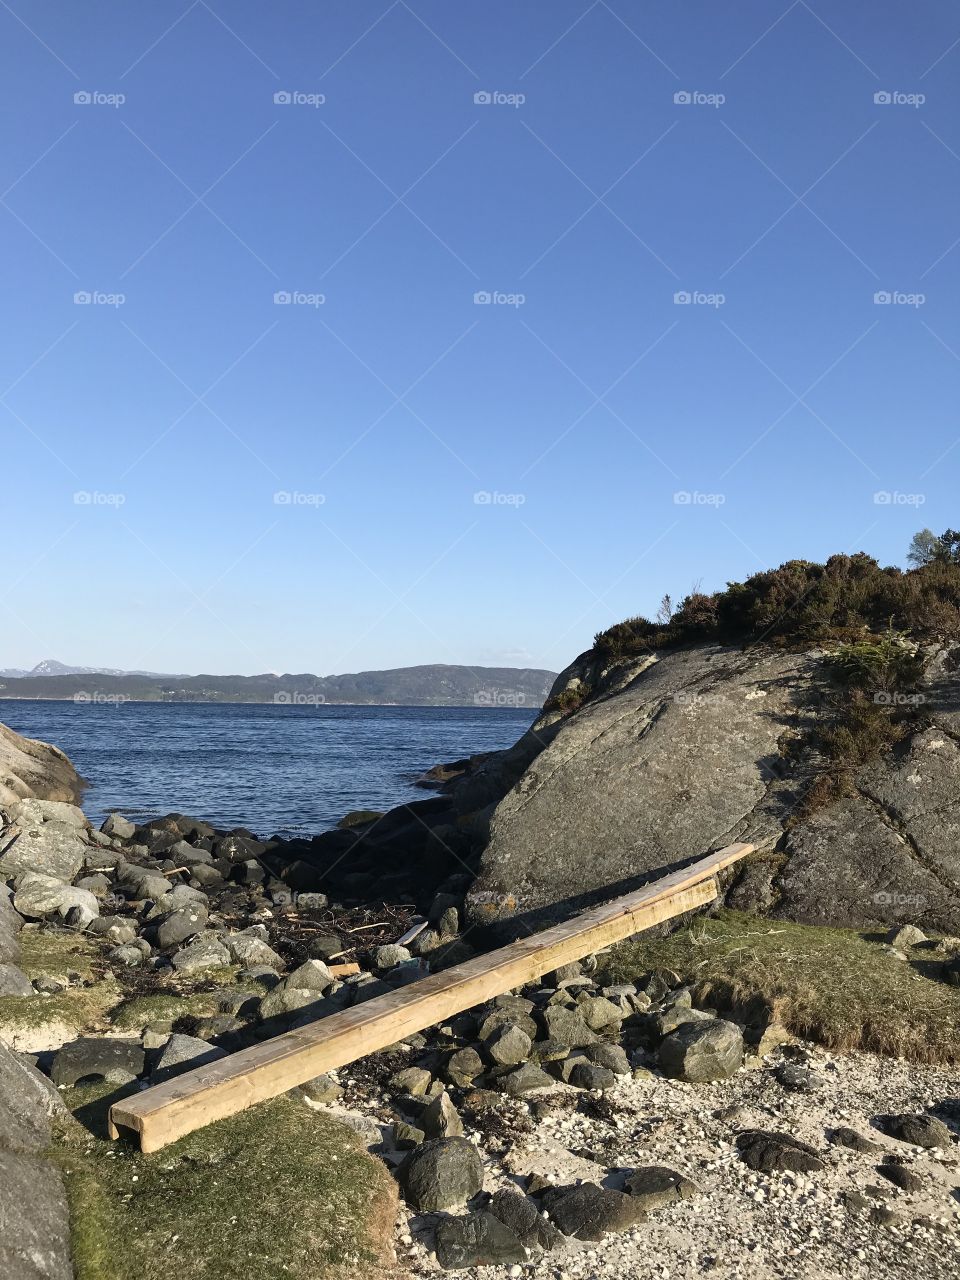 A plank laying on many rocks in Norway. Behind the plank it’s the ocean and landscape. 